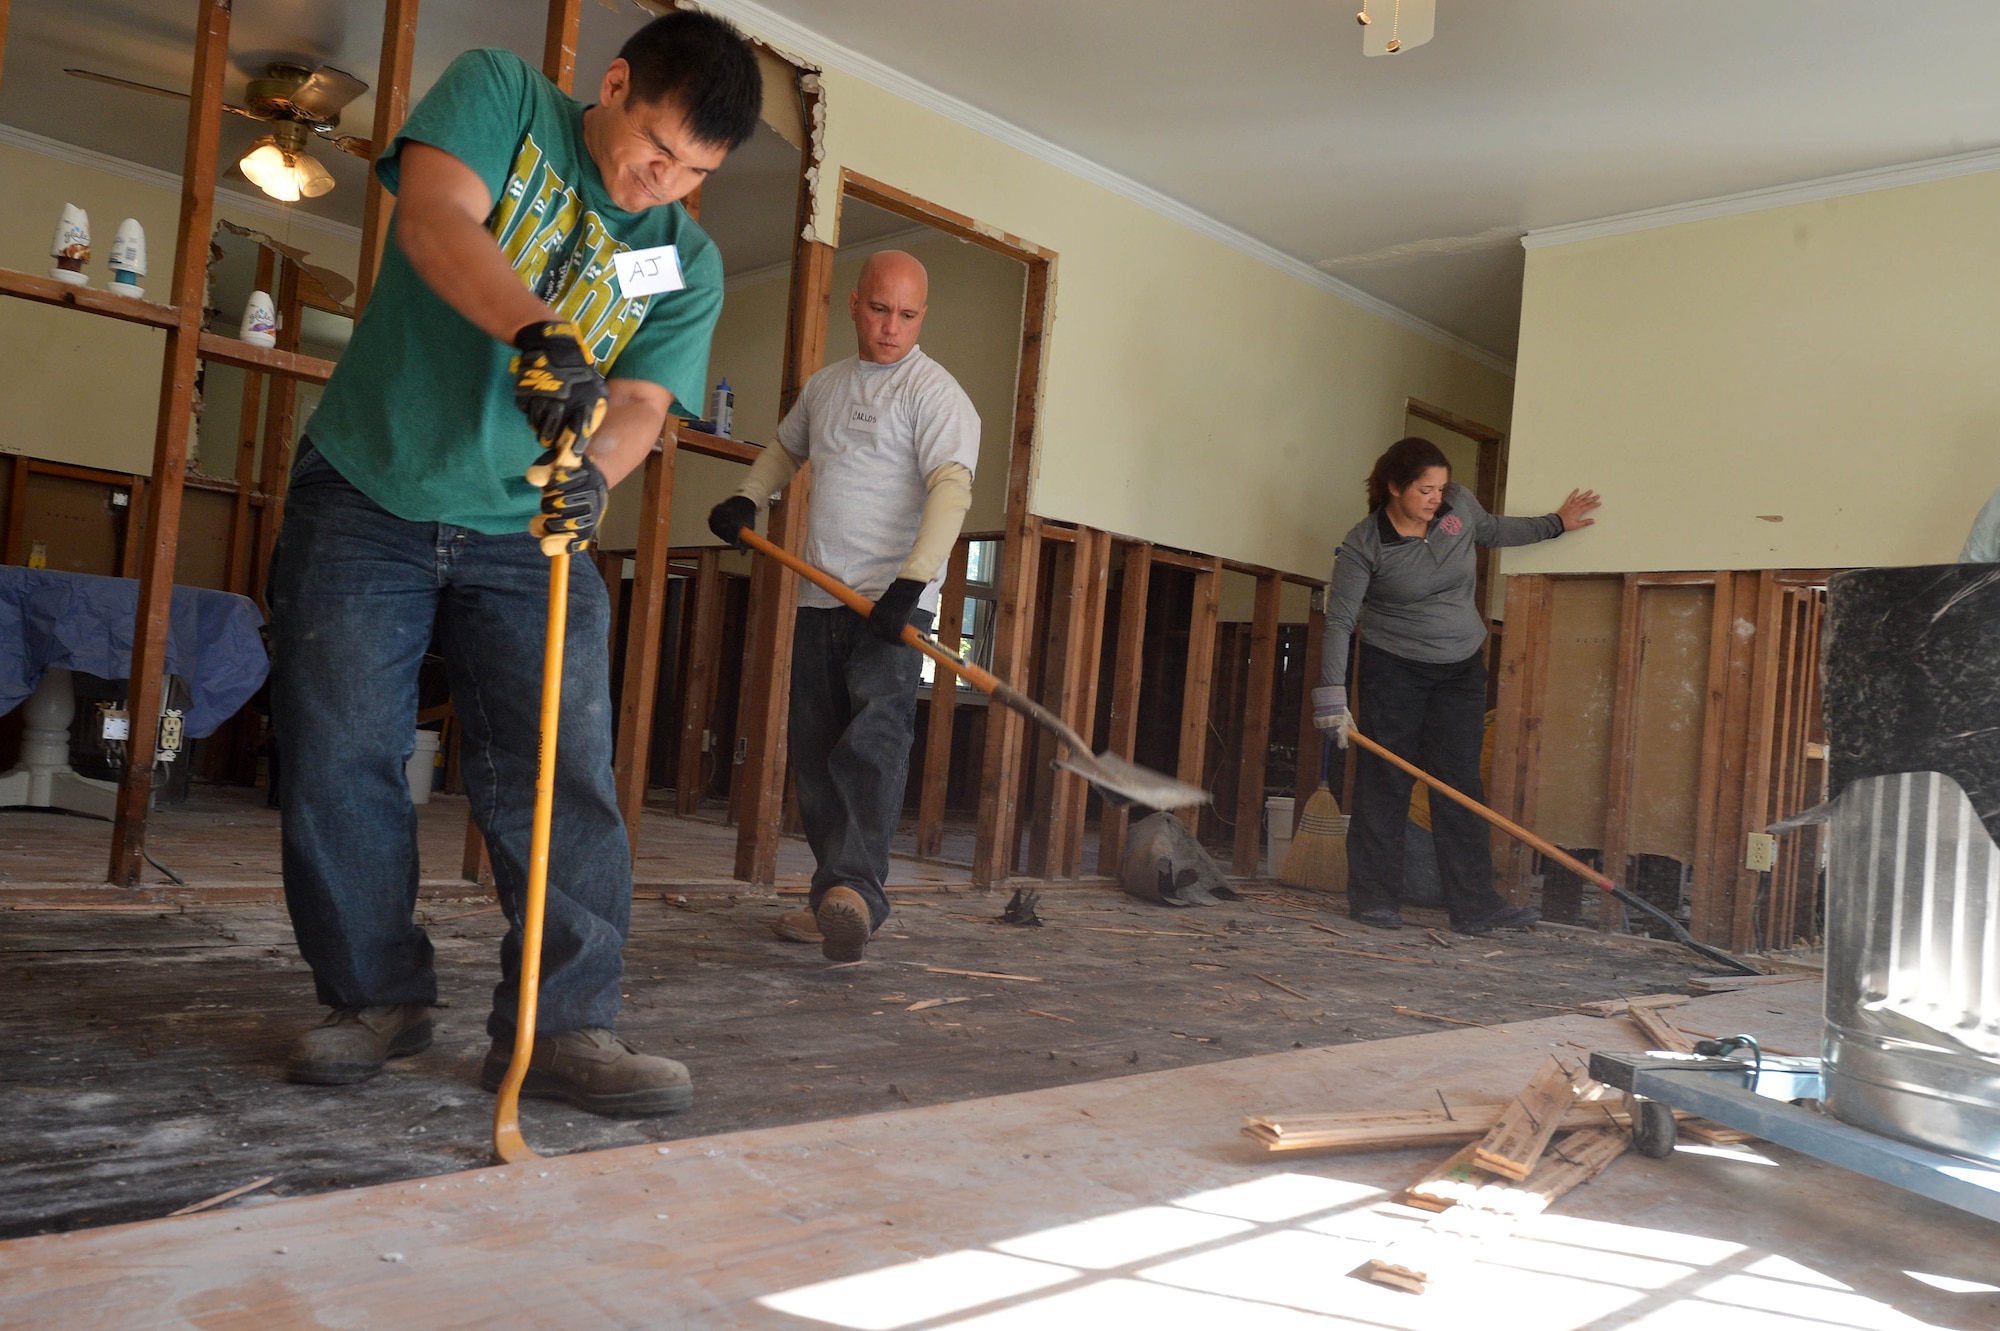 (Left) Two 20th Civil Engineer Squadron Airmen and a disaster relief volunteer tear up wood floors at a home affected by the flood in Sumter, S.C., Oct. 19, 2015. Organizations on Shaw Air Force Base, S.C., created multiple groups of more than 85 volunteers to assist in the disaster relief efforts for the Sumter community. (U.S. Air Force photo by Senior Airman Diana M. Cossaboom/Released)